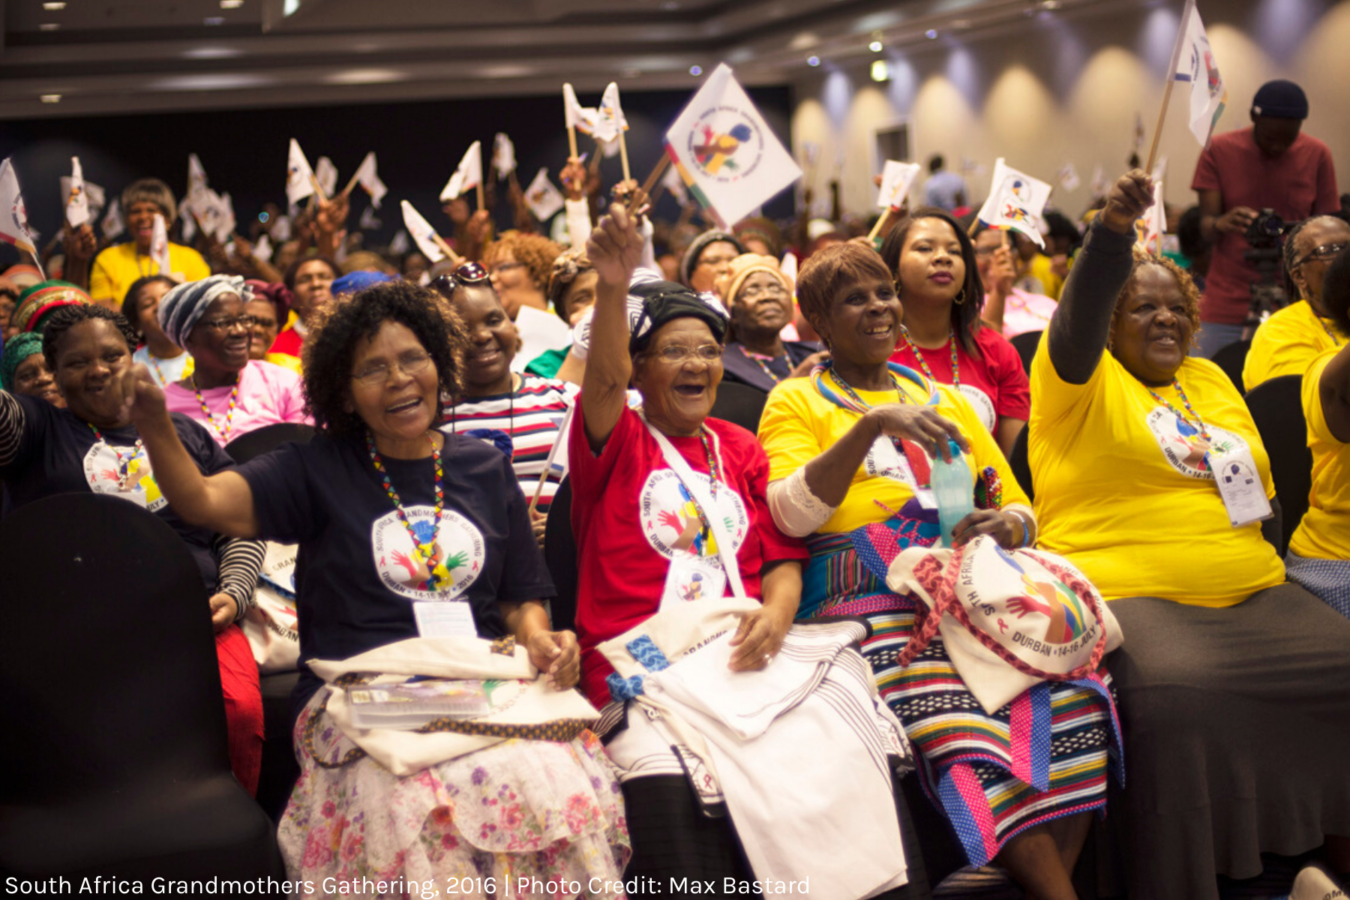 South Africa Grandmothers Gathering